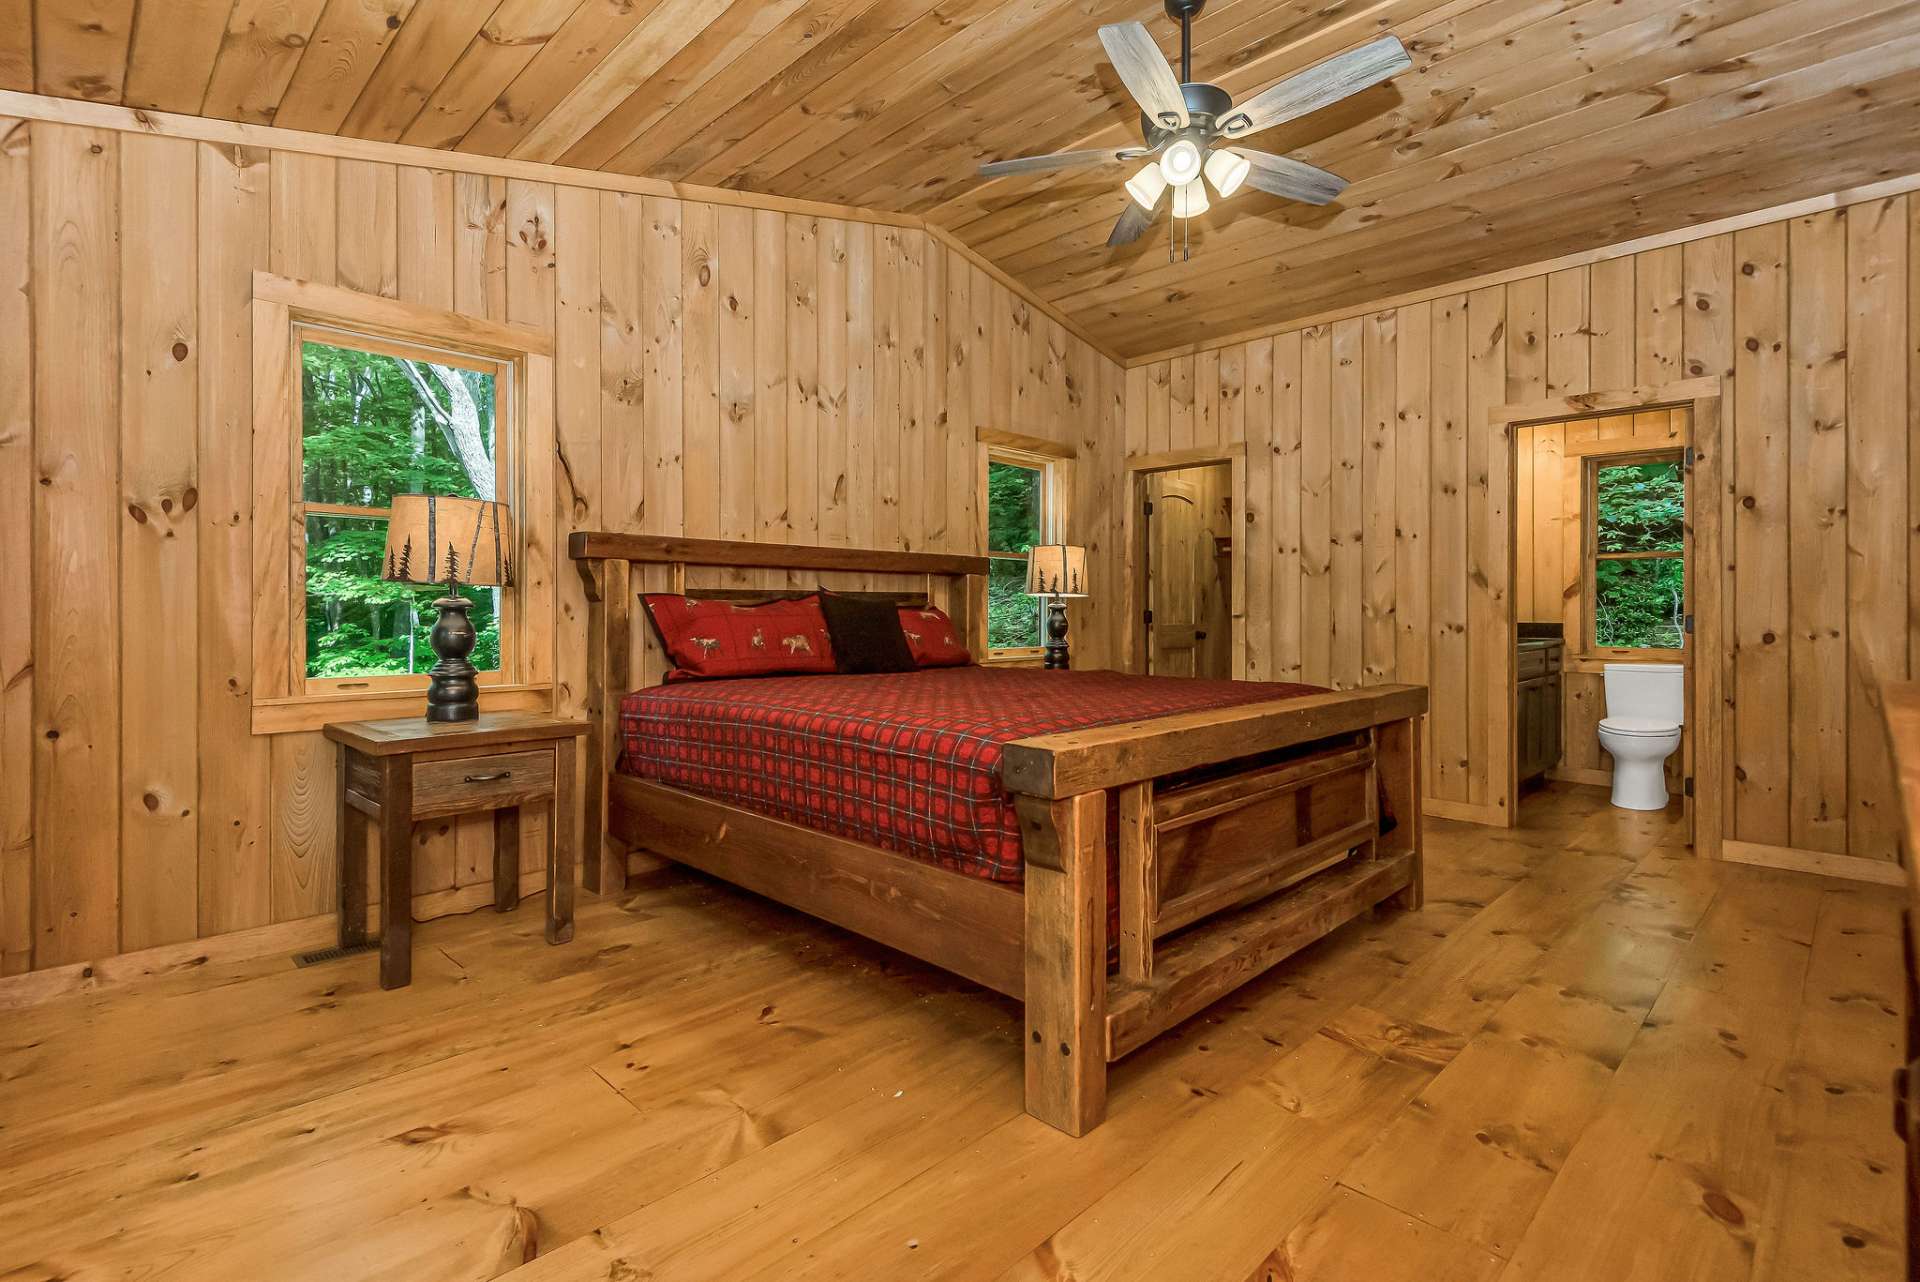 As you enter, you'll find the continuation of the wide plank pine flooring and the inviting warmth of tongue-and-groove walls and ceiling, creating a cozy and rustic ambiance.